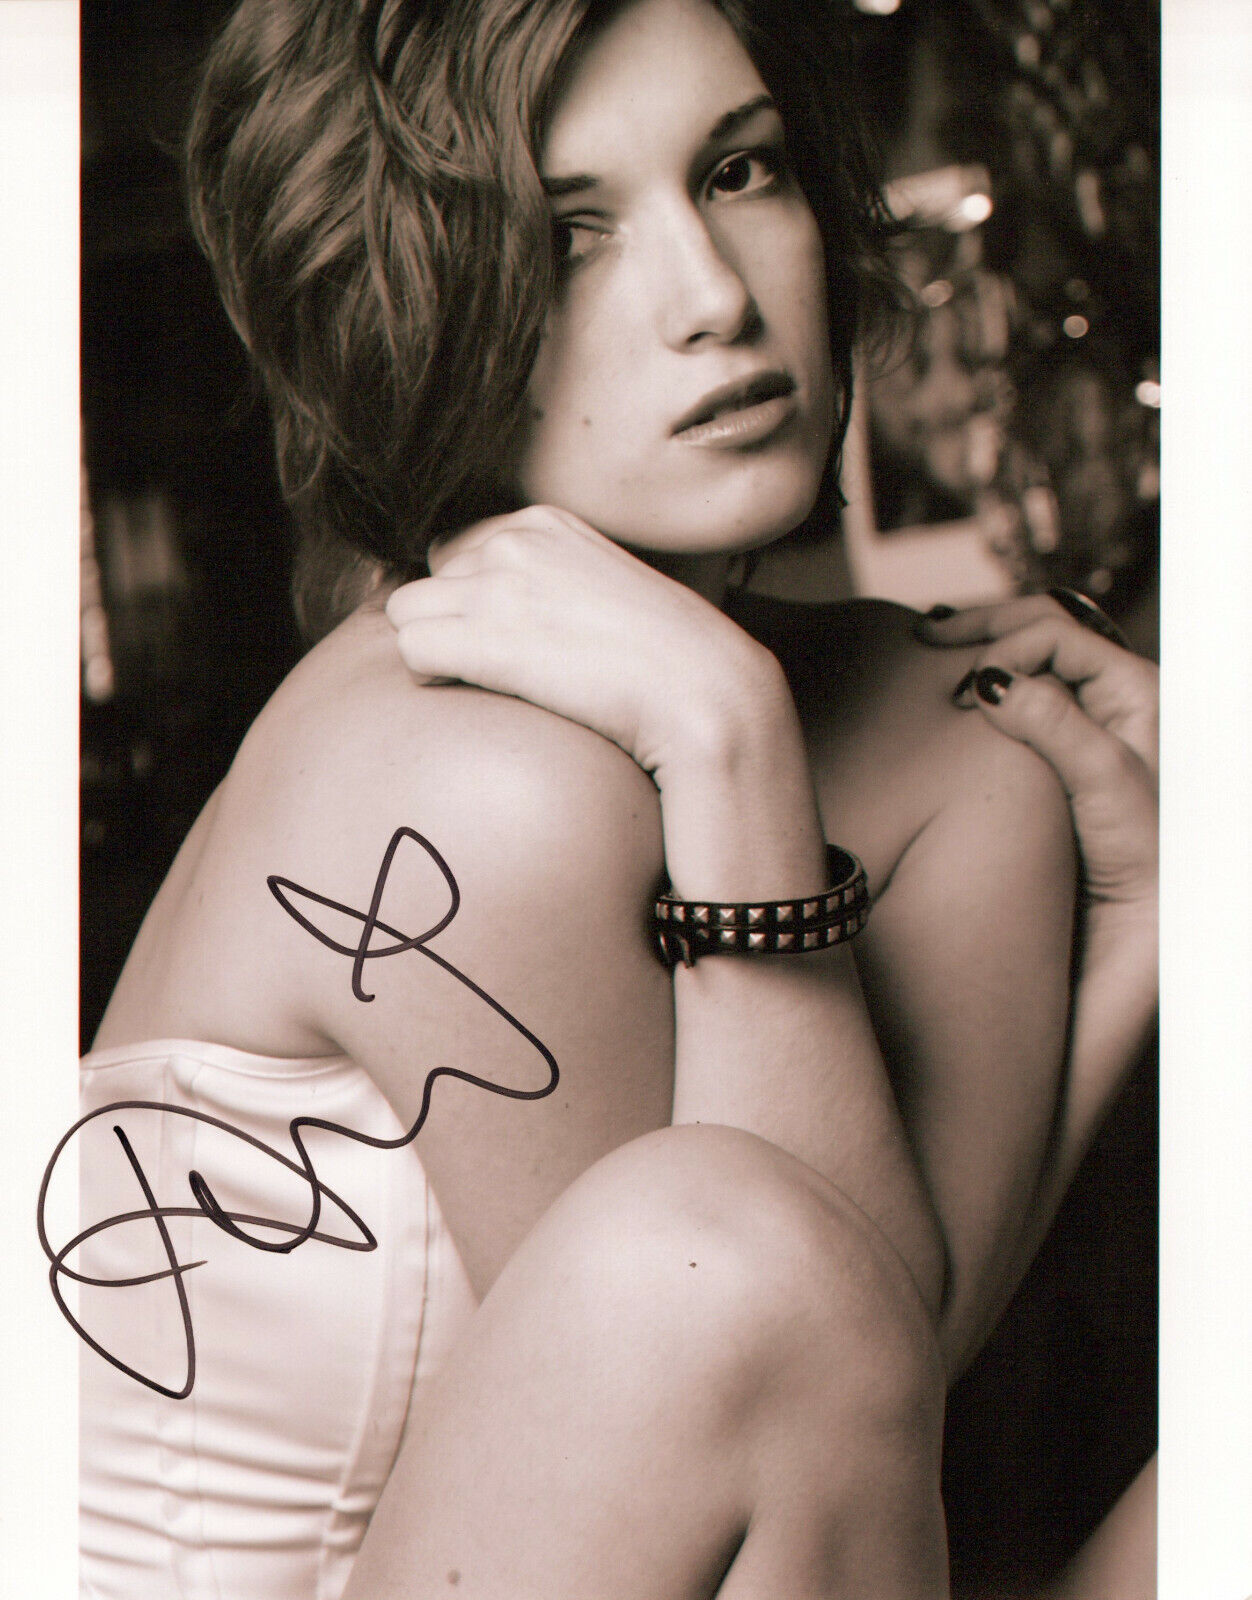 Dani Thorne glamour shot autographed Photo Poster painting signed 8x10 #7